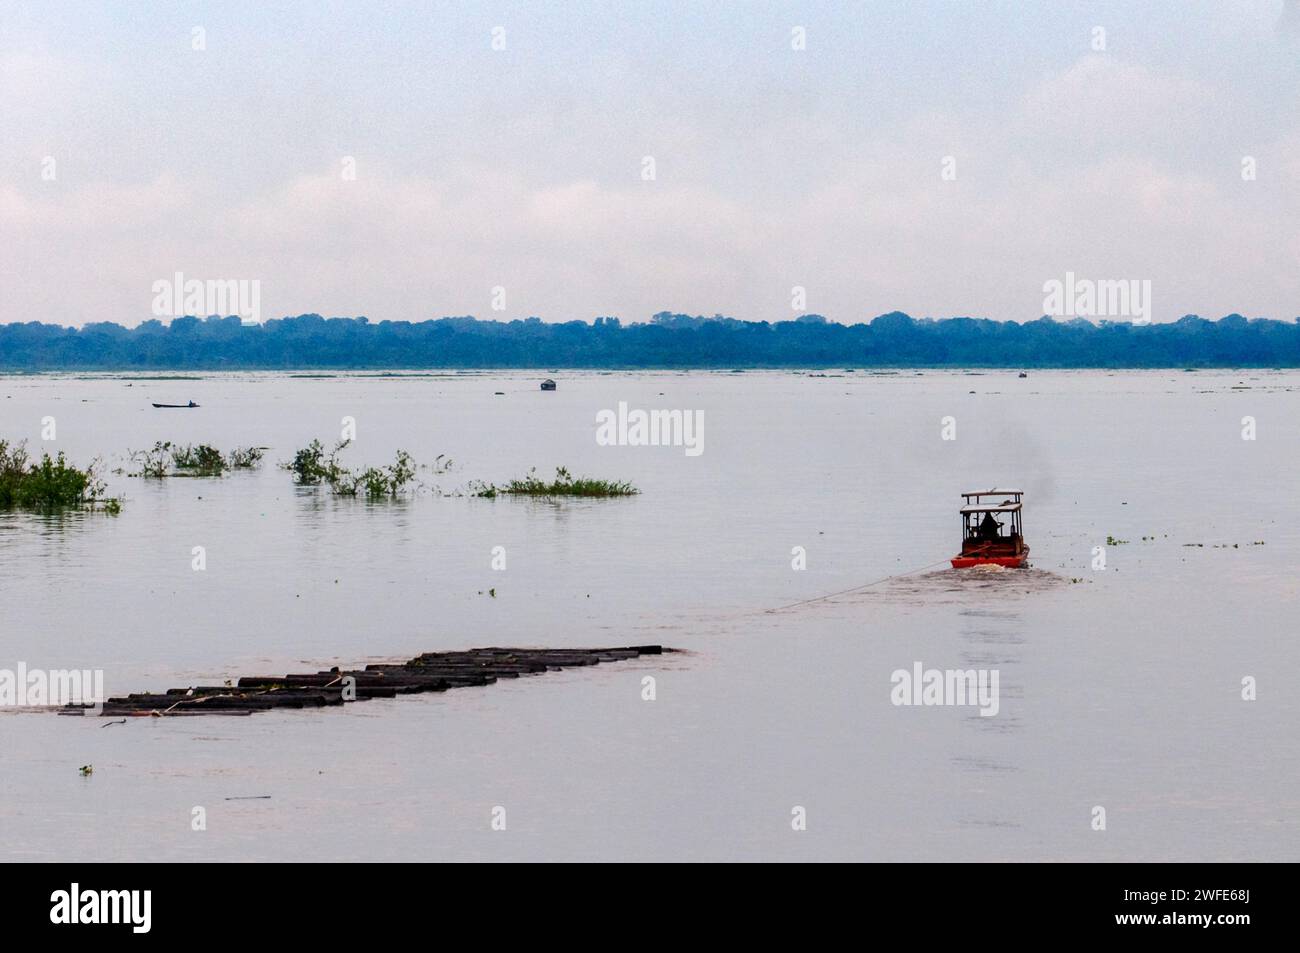 Boats transporting cut wood in the Amazon River, Iquitos, Loreto, Peru, South America.  It is surrounded by the Port of Iquitos, formed by the Amazon, Stock Photo